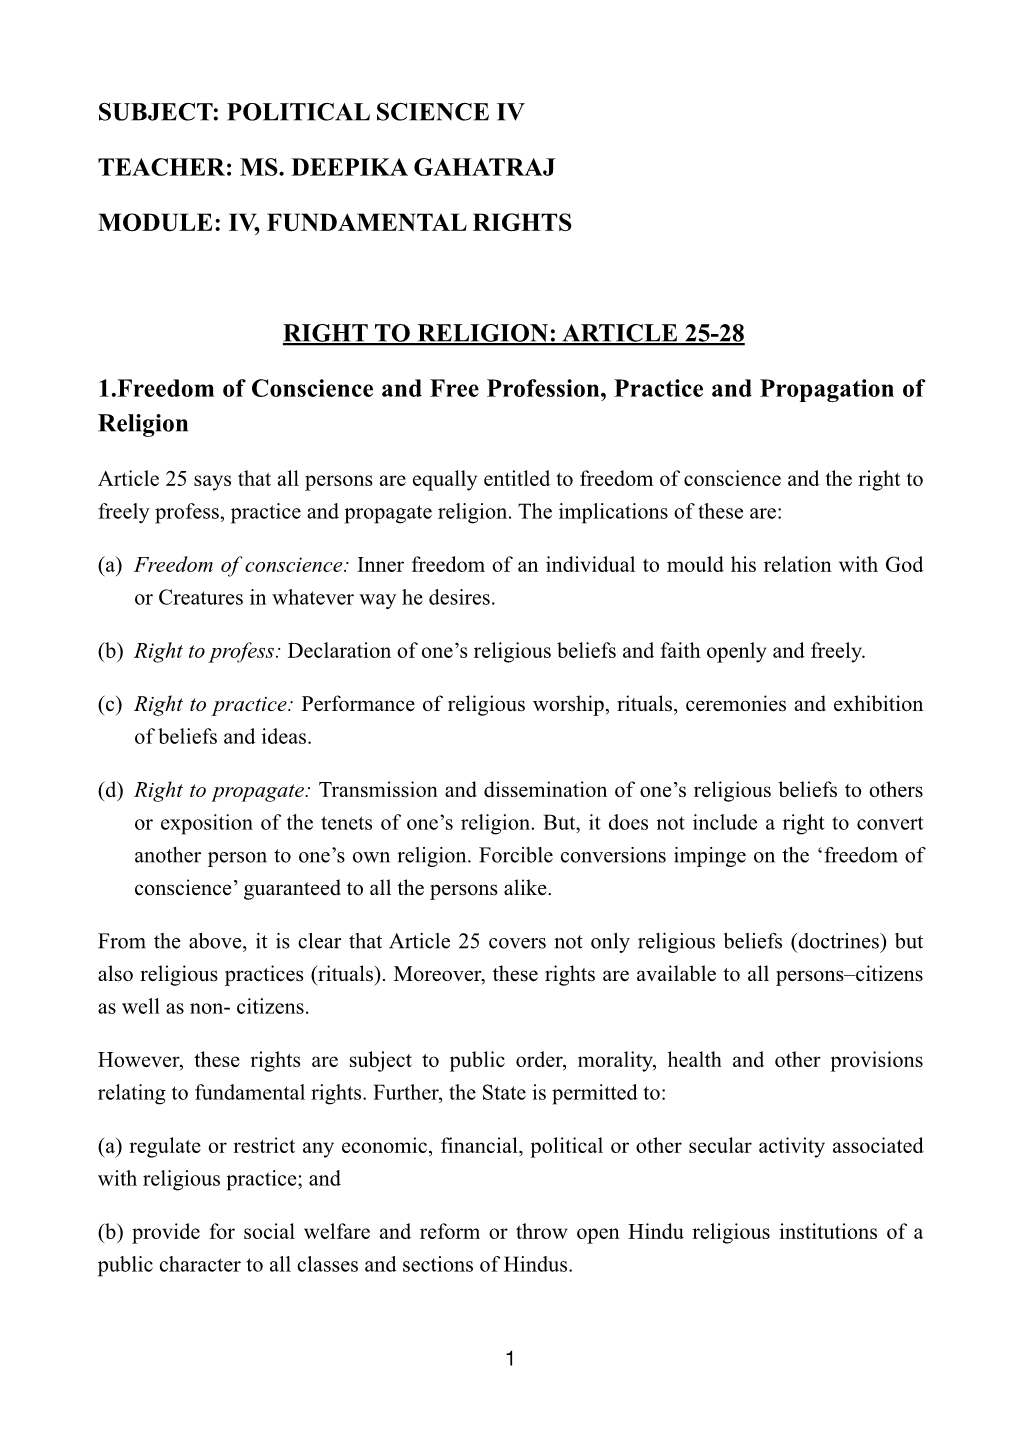 Fundamental Rights- Article 25-28